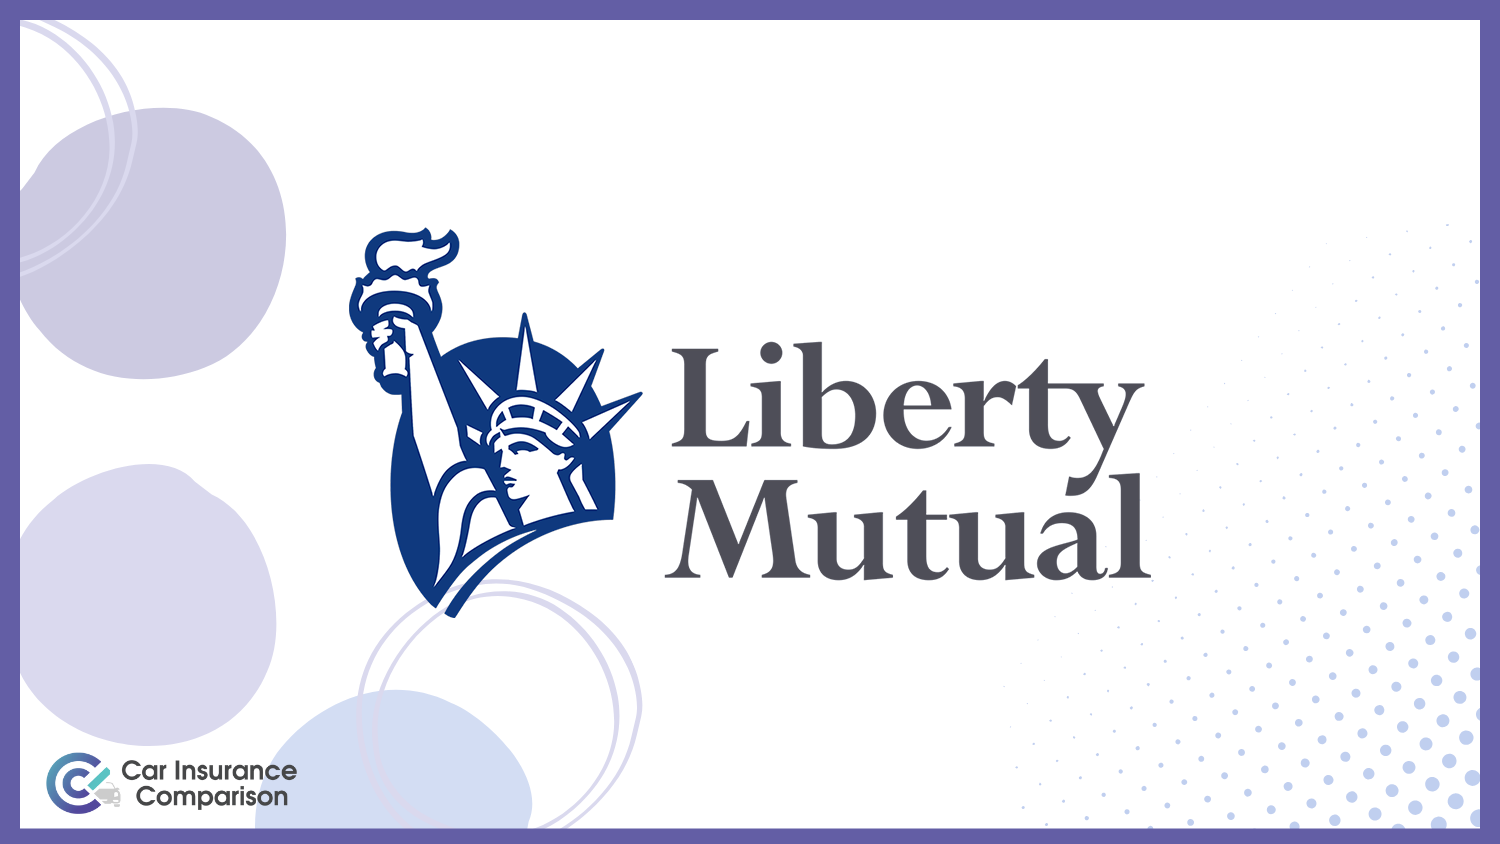 Liberty Mutual: Compare Car Insurance Rates for First-time Drivers